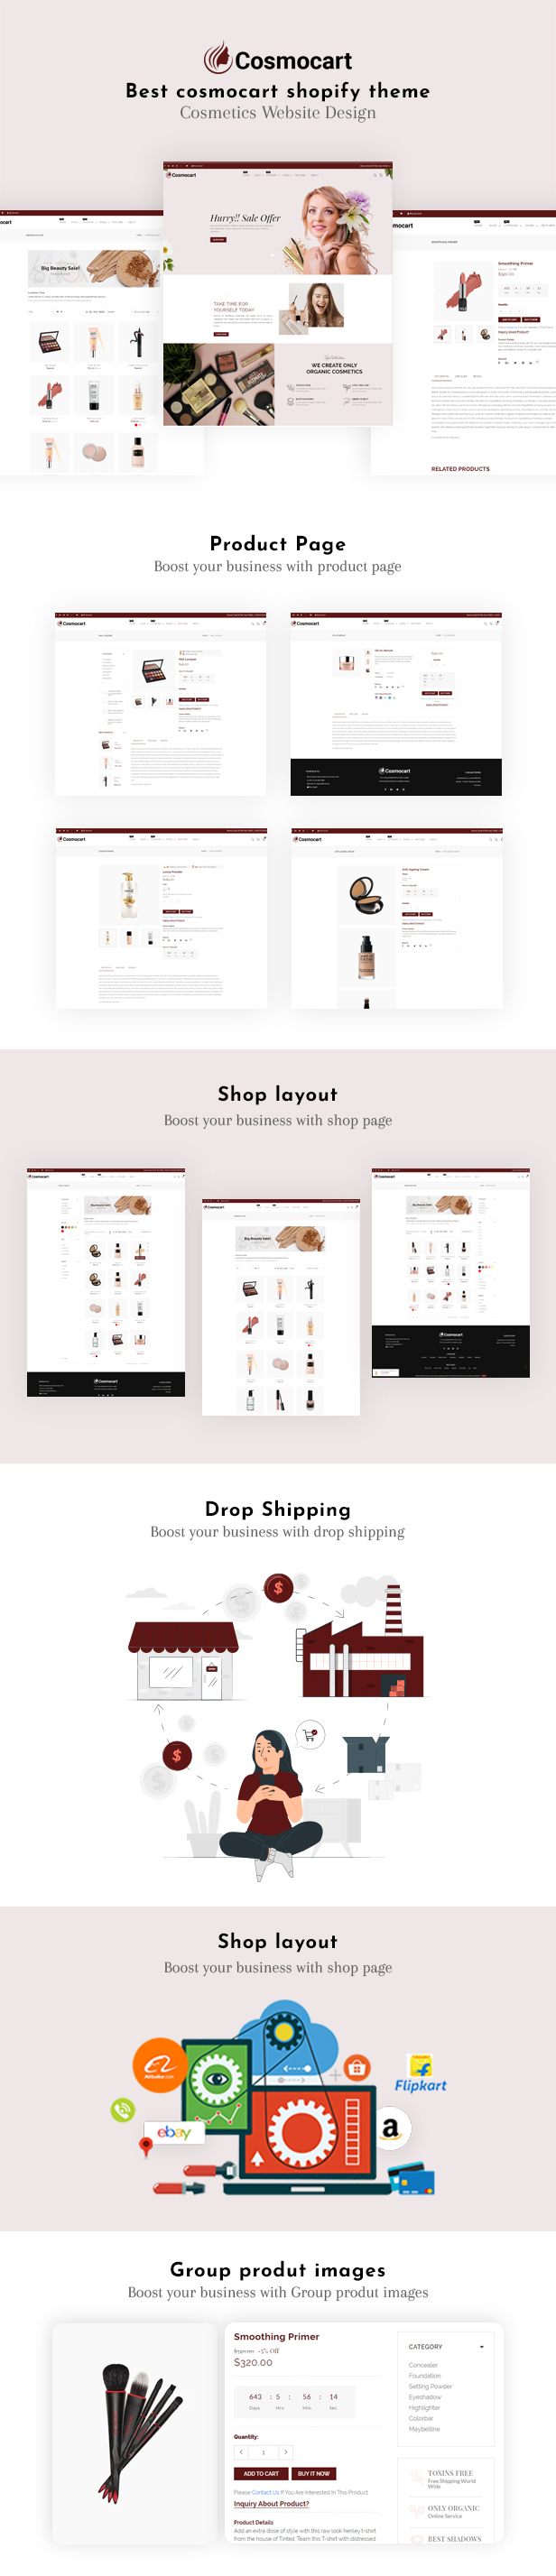 Cosmocart – Beauty & Cosmetics Shopify Theme OS 2.0